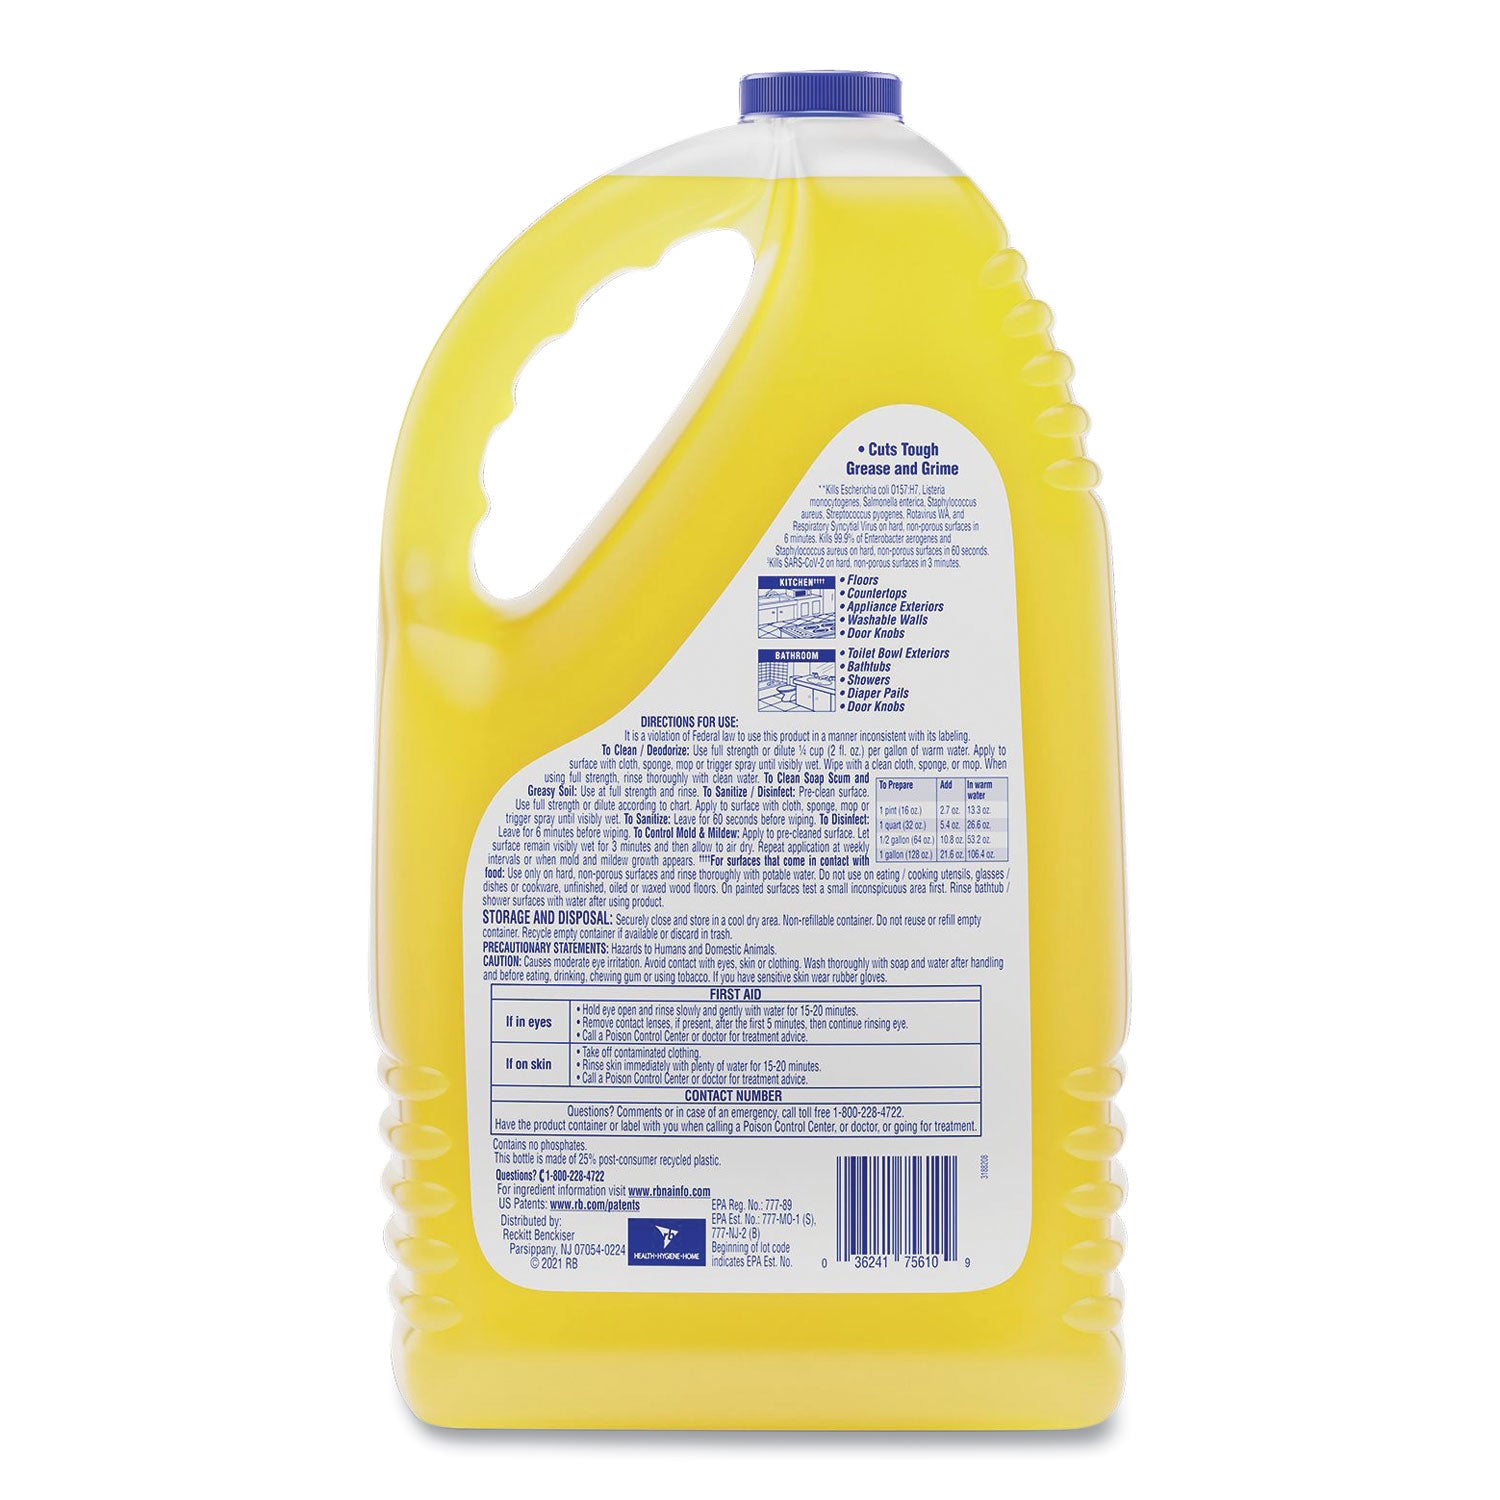 clean-and-fresh-multi-surface-cleaner-sparkling-lemon-and-sunflower-essence-144-oz-bottle_rac77617ea - 4